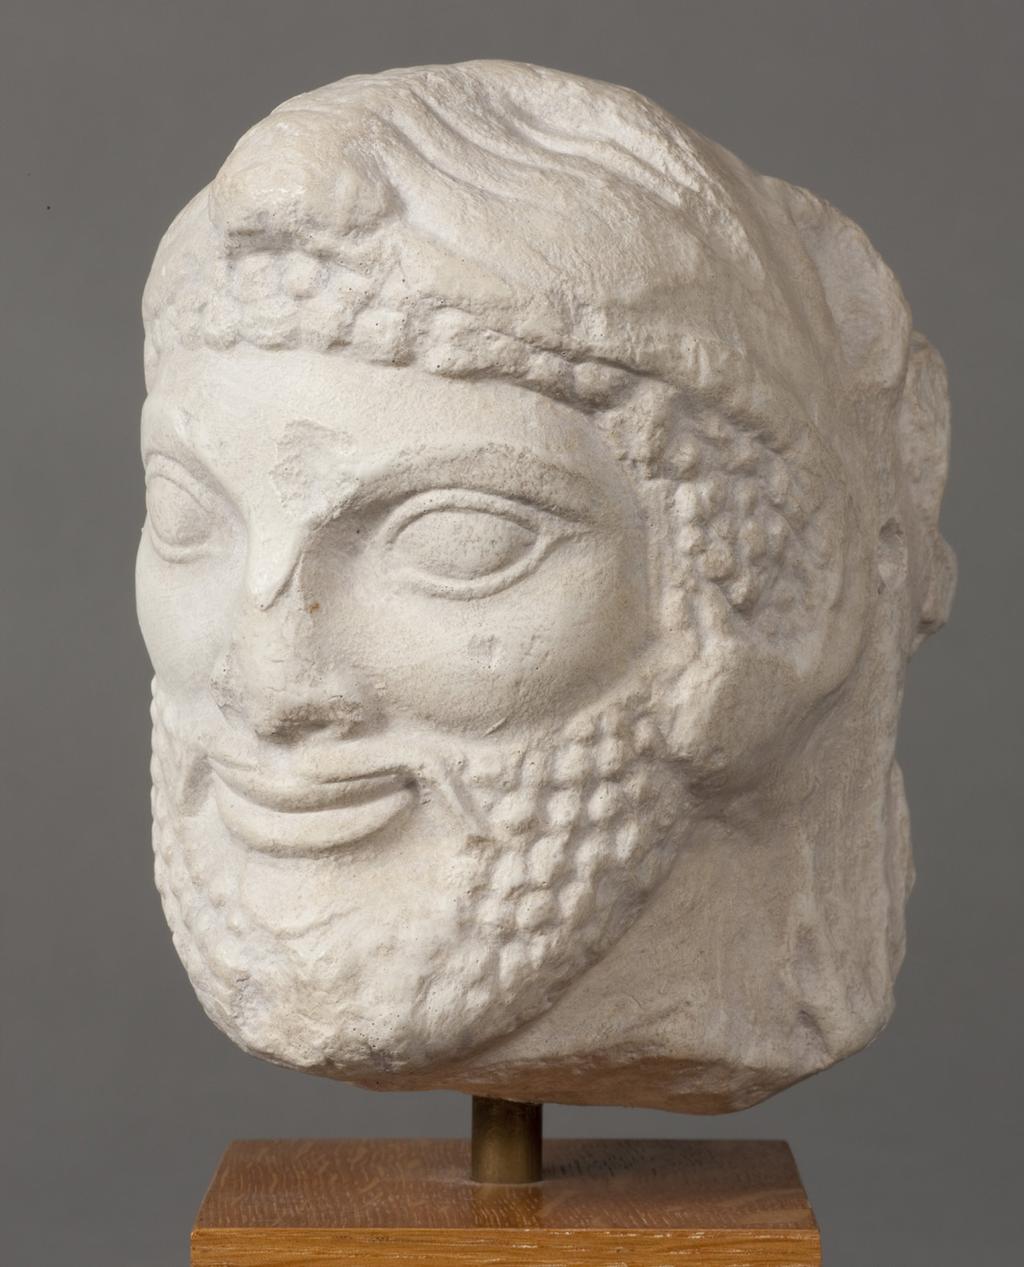 Ask students to identify one example of ancient sculpture featuring a hero, and one example of a contemporary sculpture or depiction of a hero perhaps one of those they discovered in their pre-visit